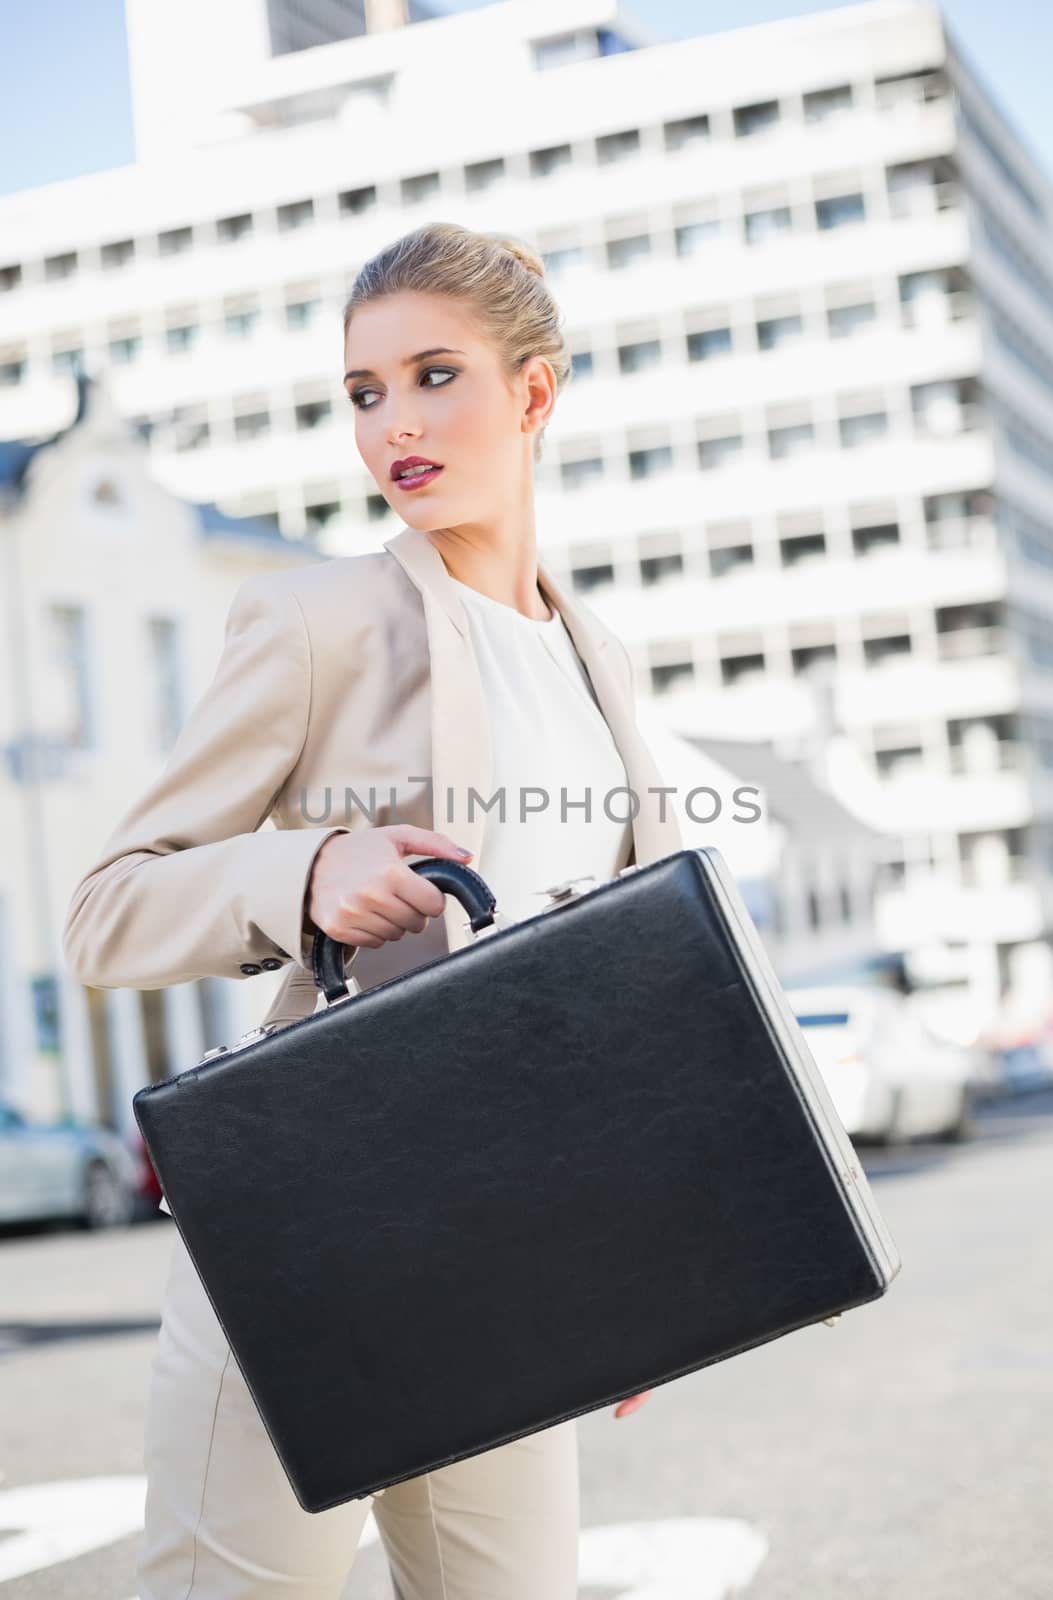 Serious elegant businesswoman holding briefcase outdoors on urban background